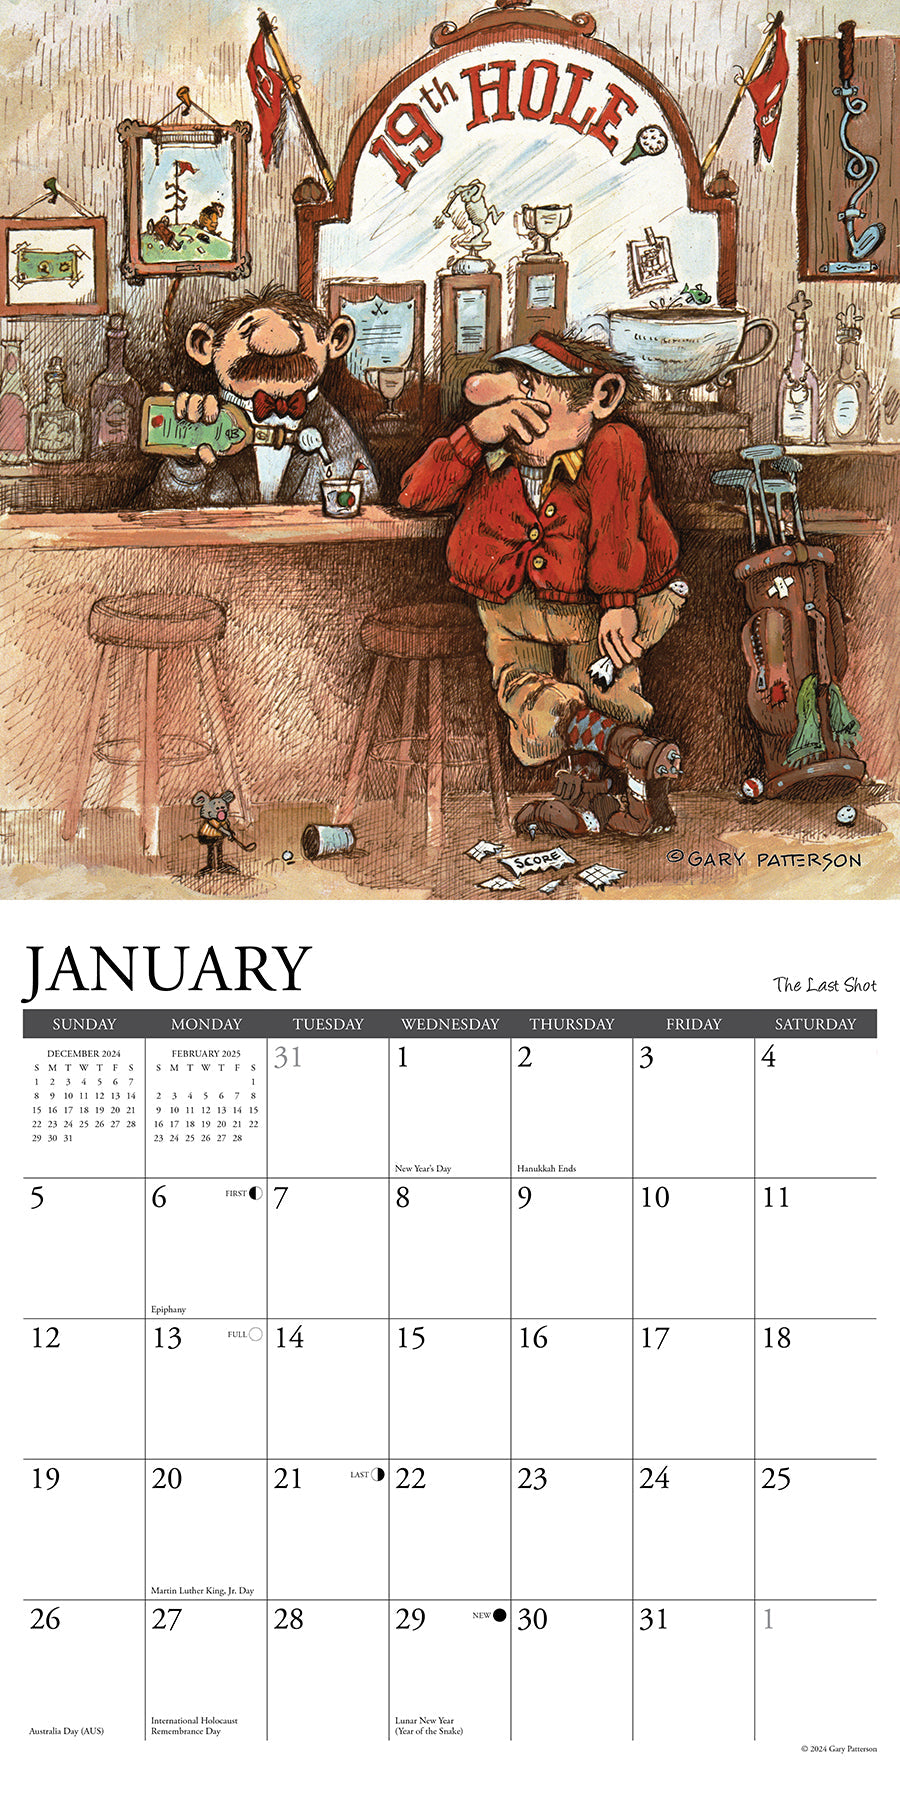 2025 Golf Crazy by Gary Patterson - Square Wall Calendar (US Only)